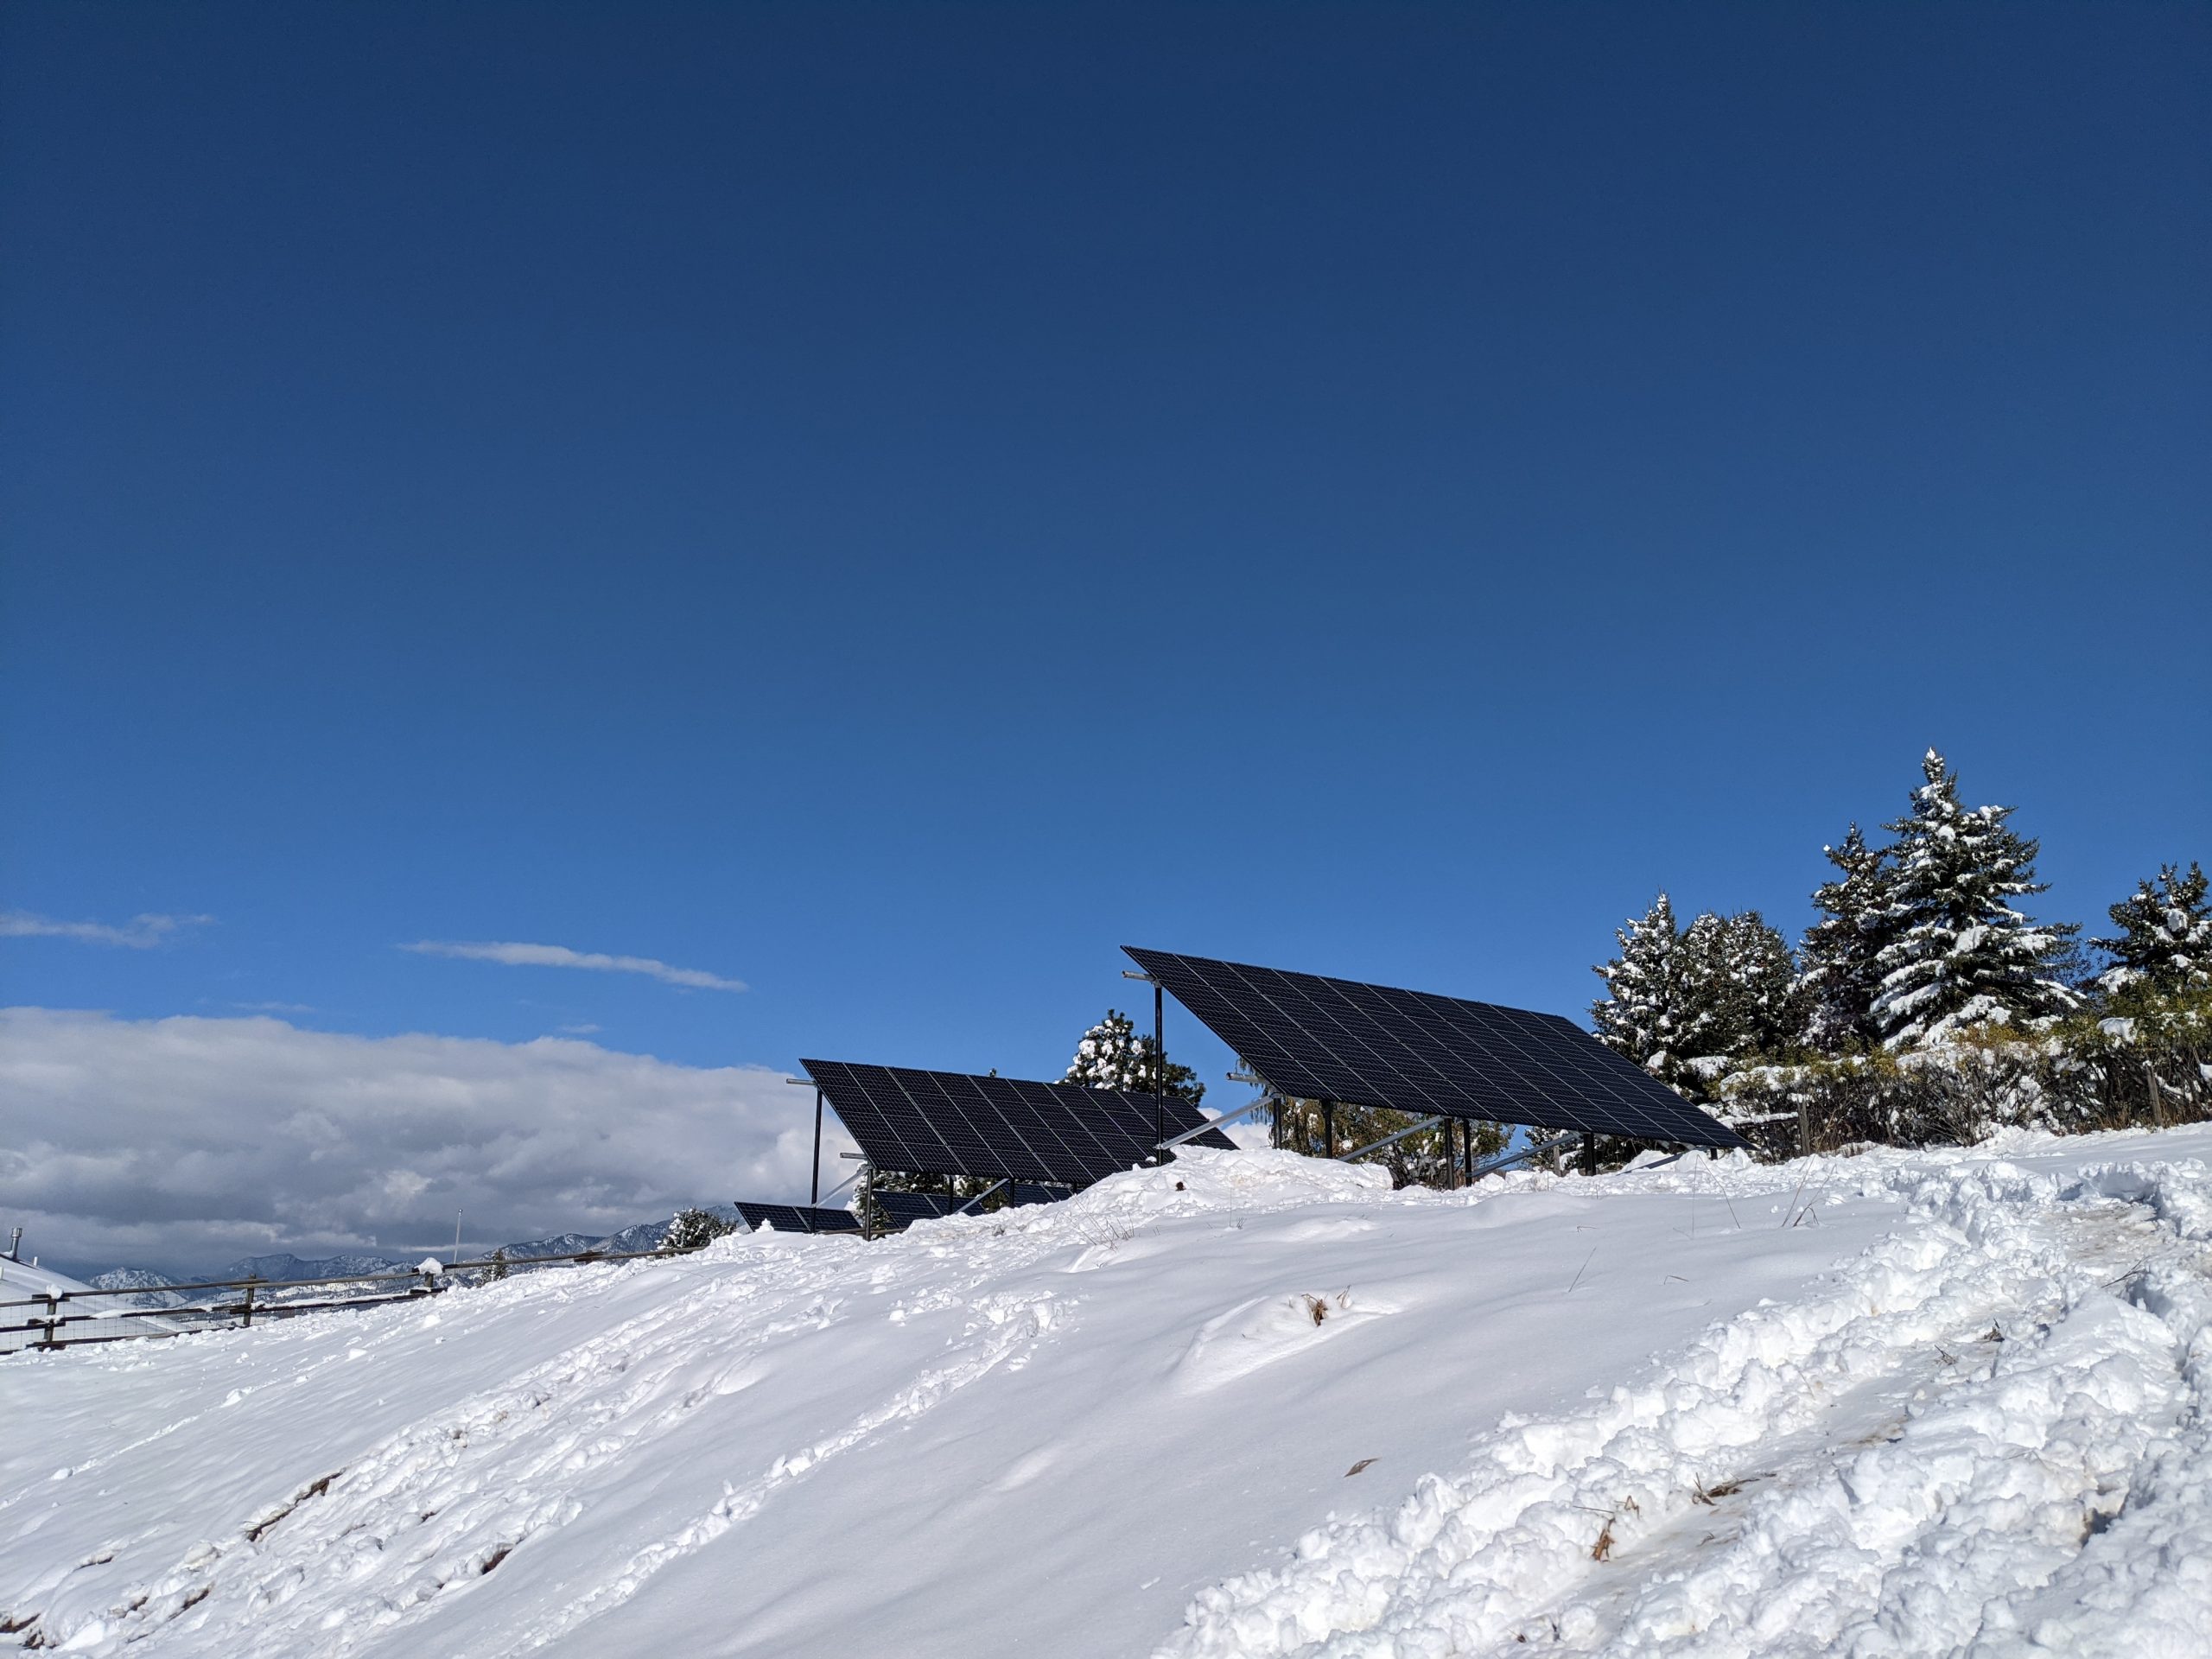 Off Grid Solar Panels in Snowy Mountains